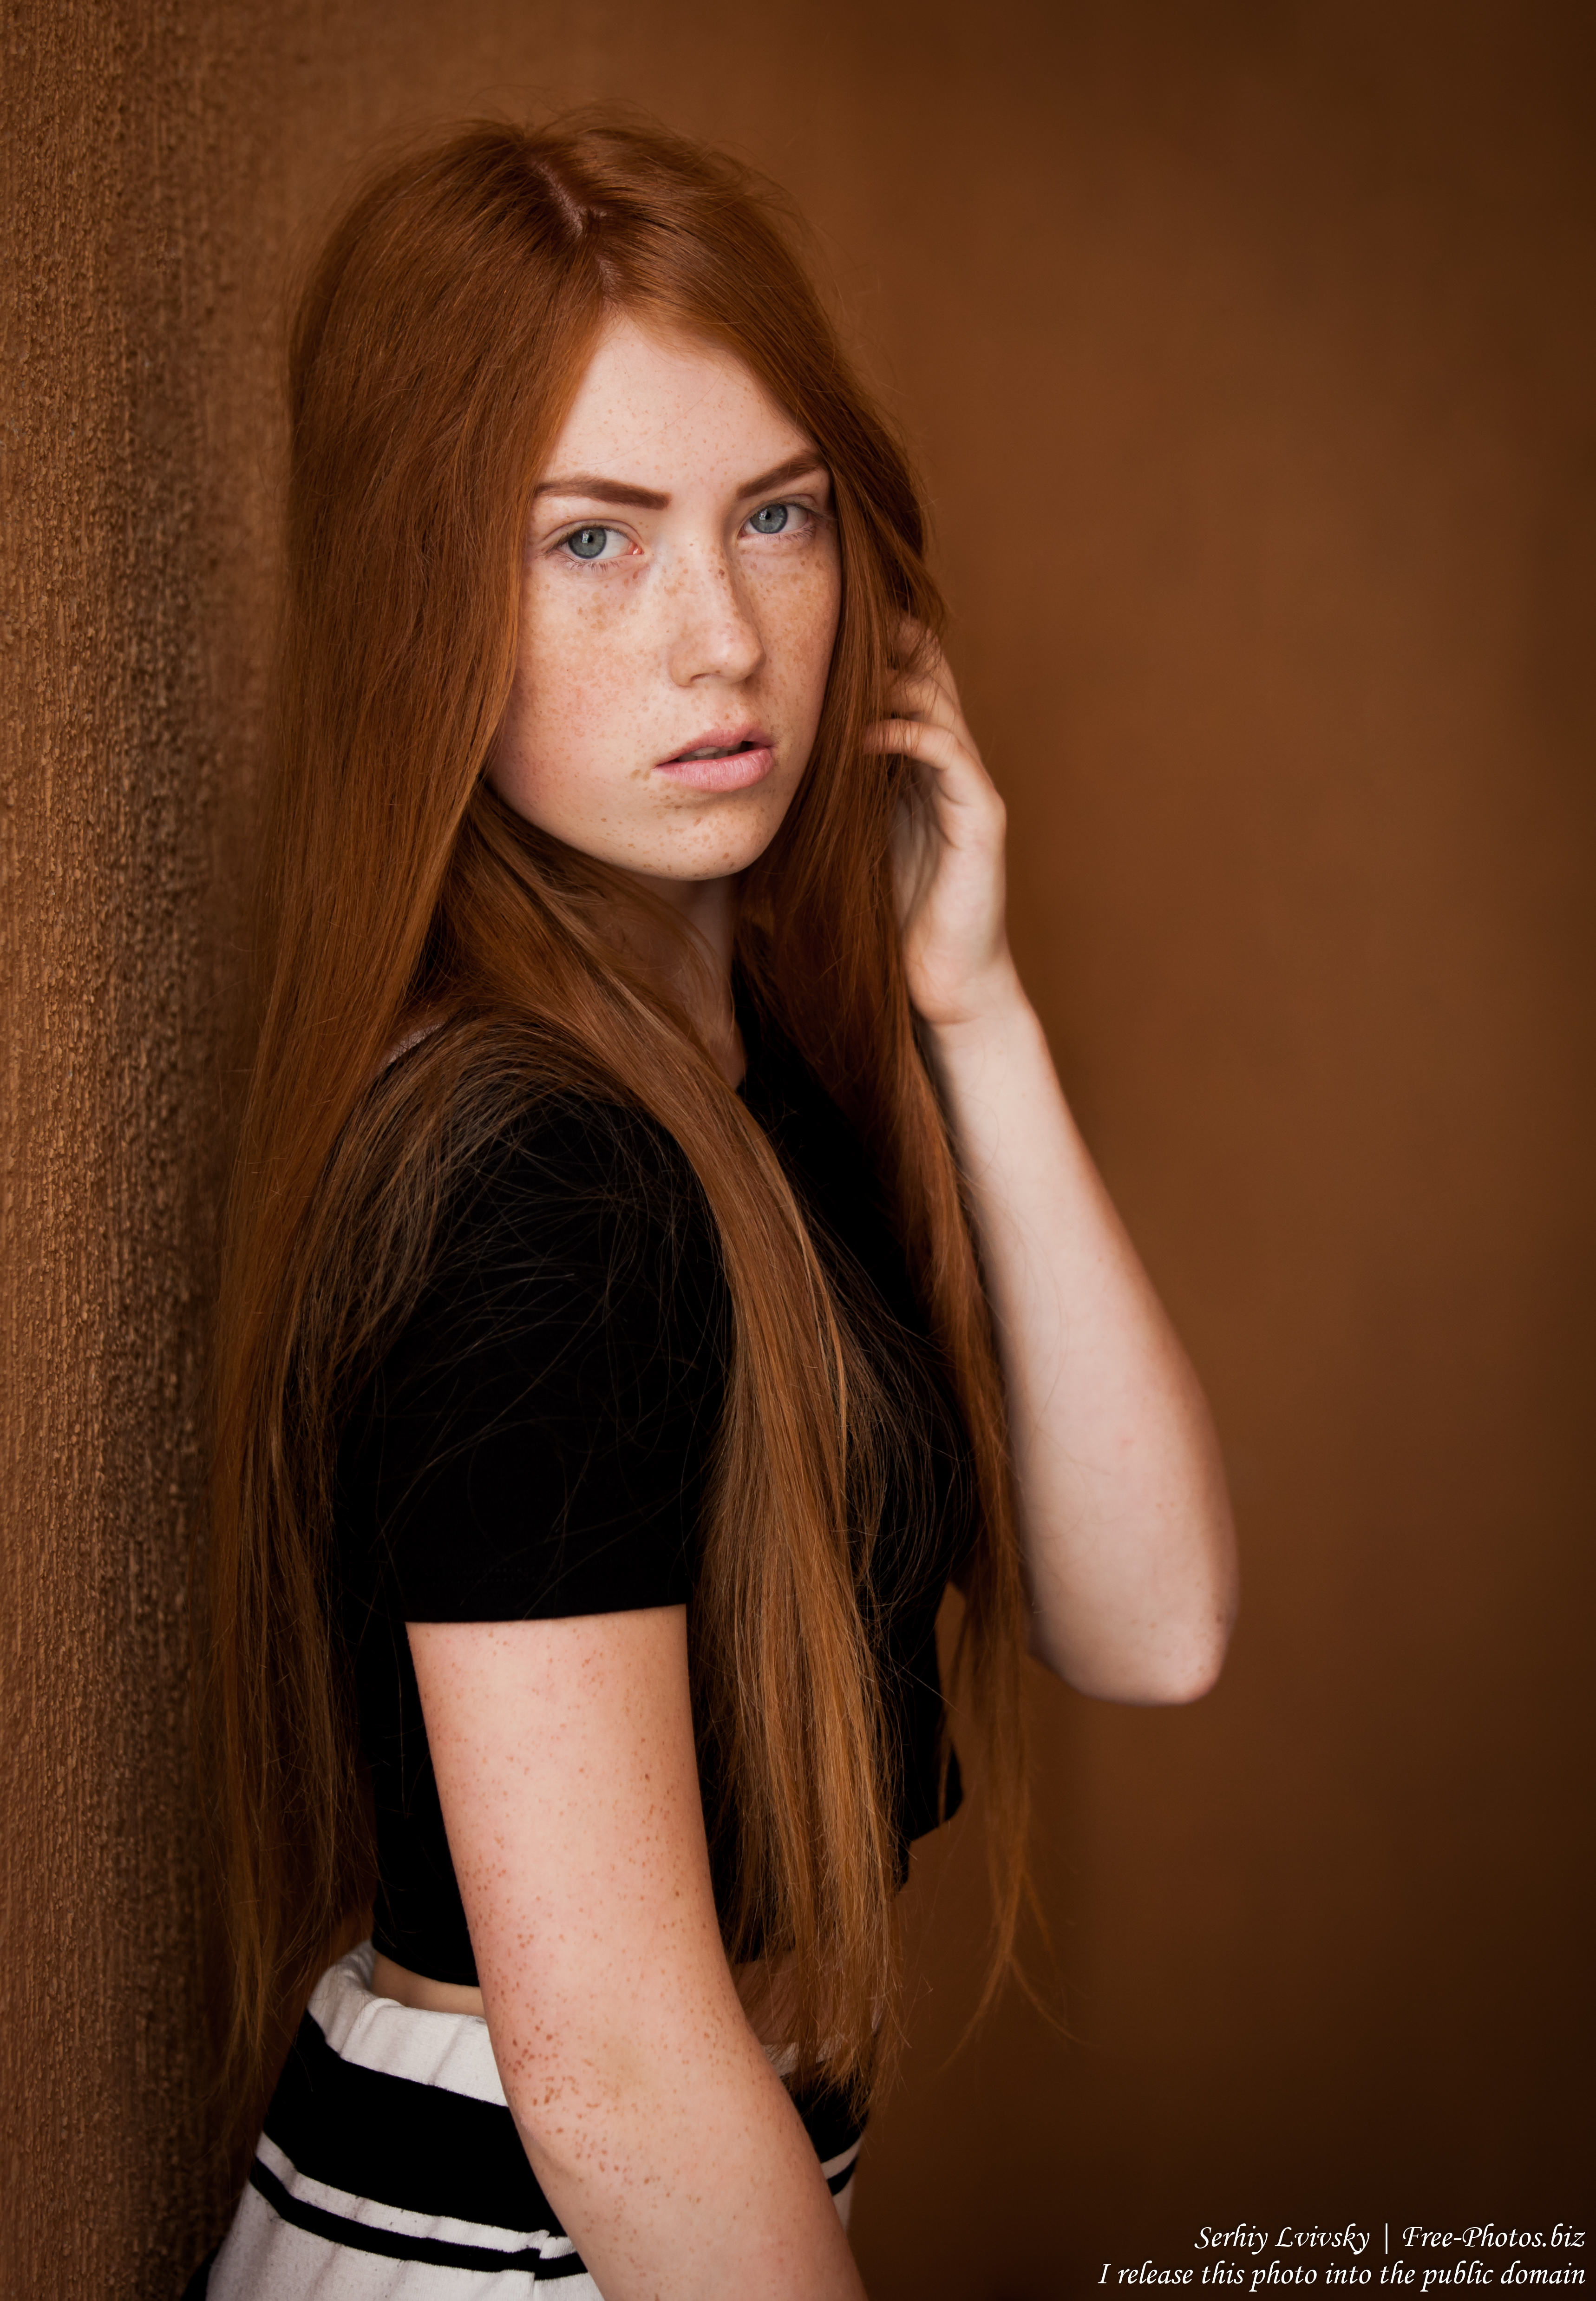 a 15-year-old red-haired Catholic girl photographed by Serhiy Lvivsky in August 2015, picture 17